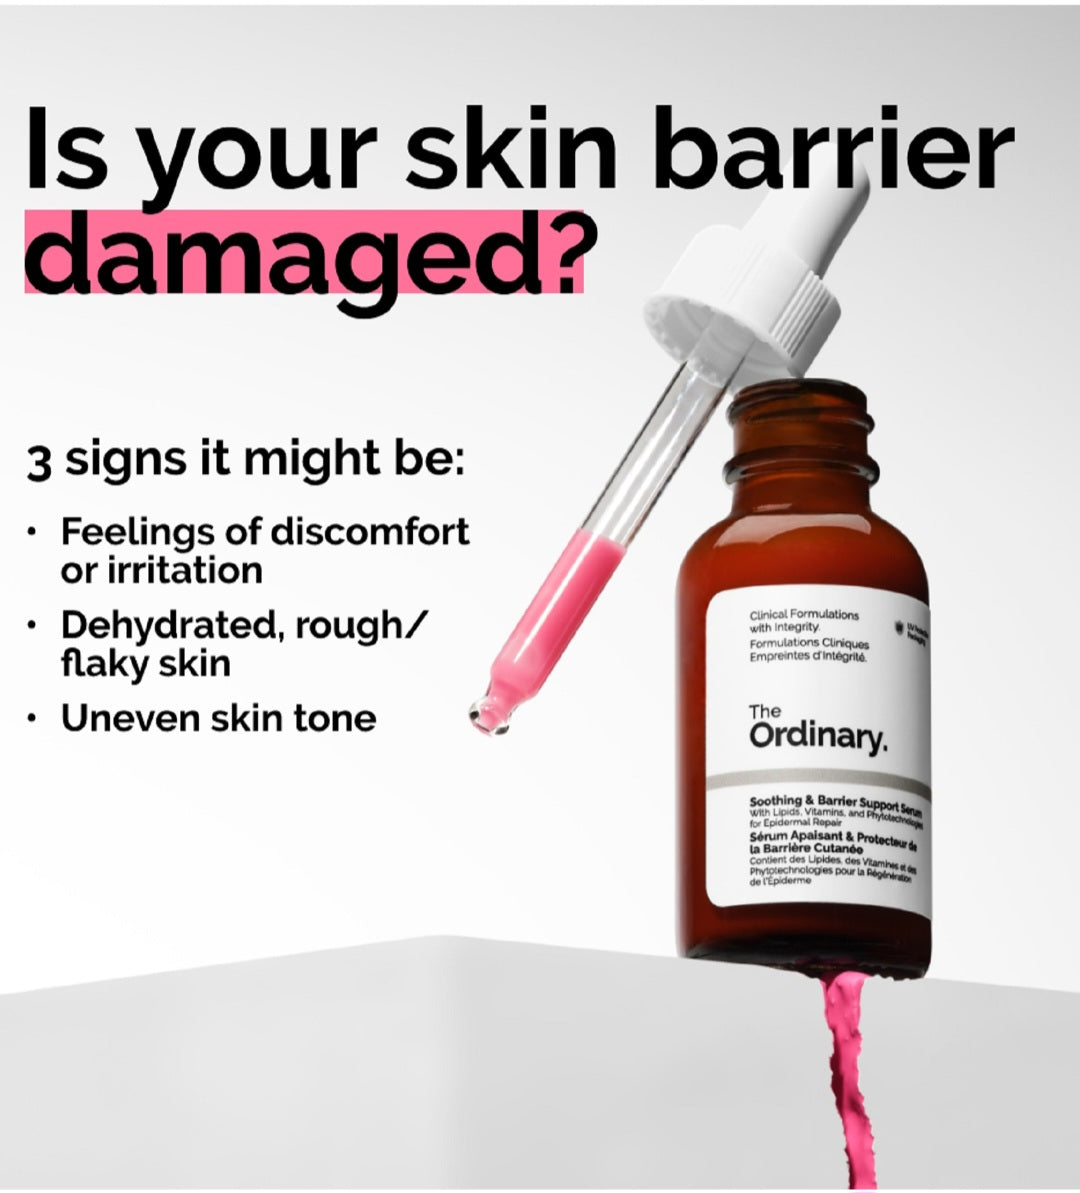 The Ordinary
Soothing & Barrier Support Serum (30ML)